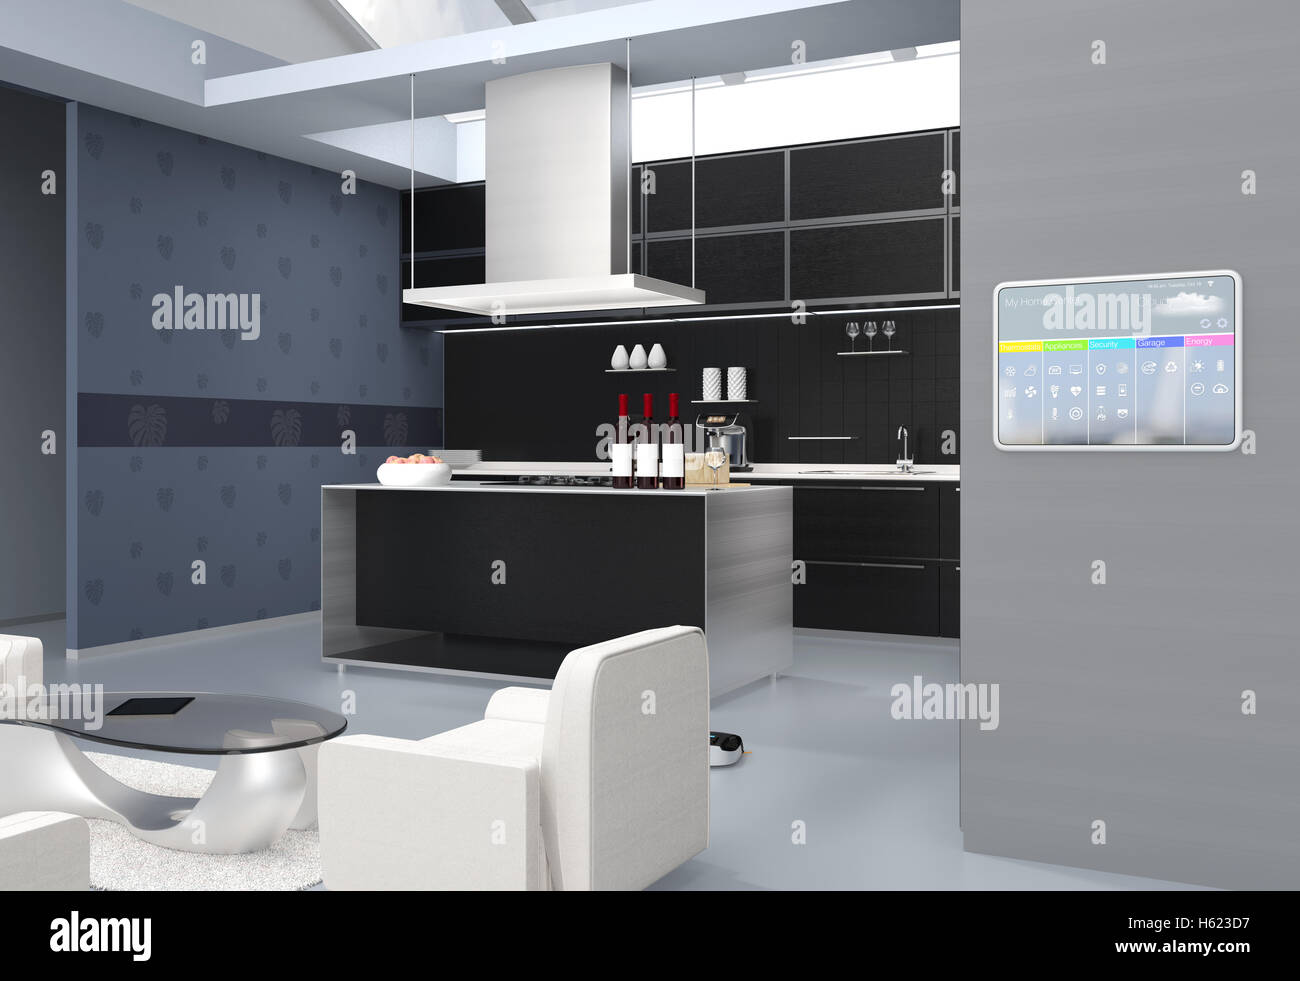 Home automation control panel on the kitchen wall. 3D rendering image. Stock Photo